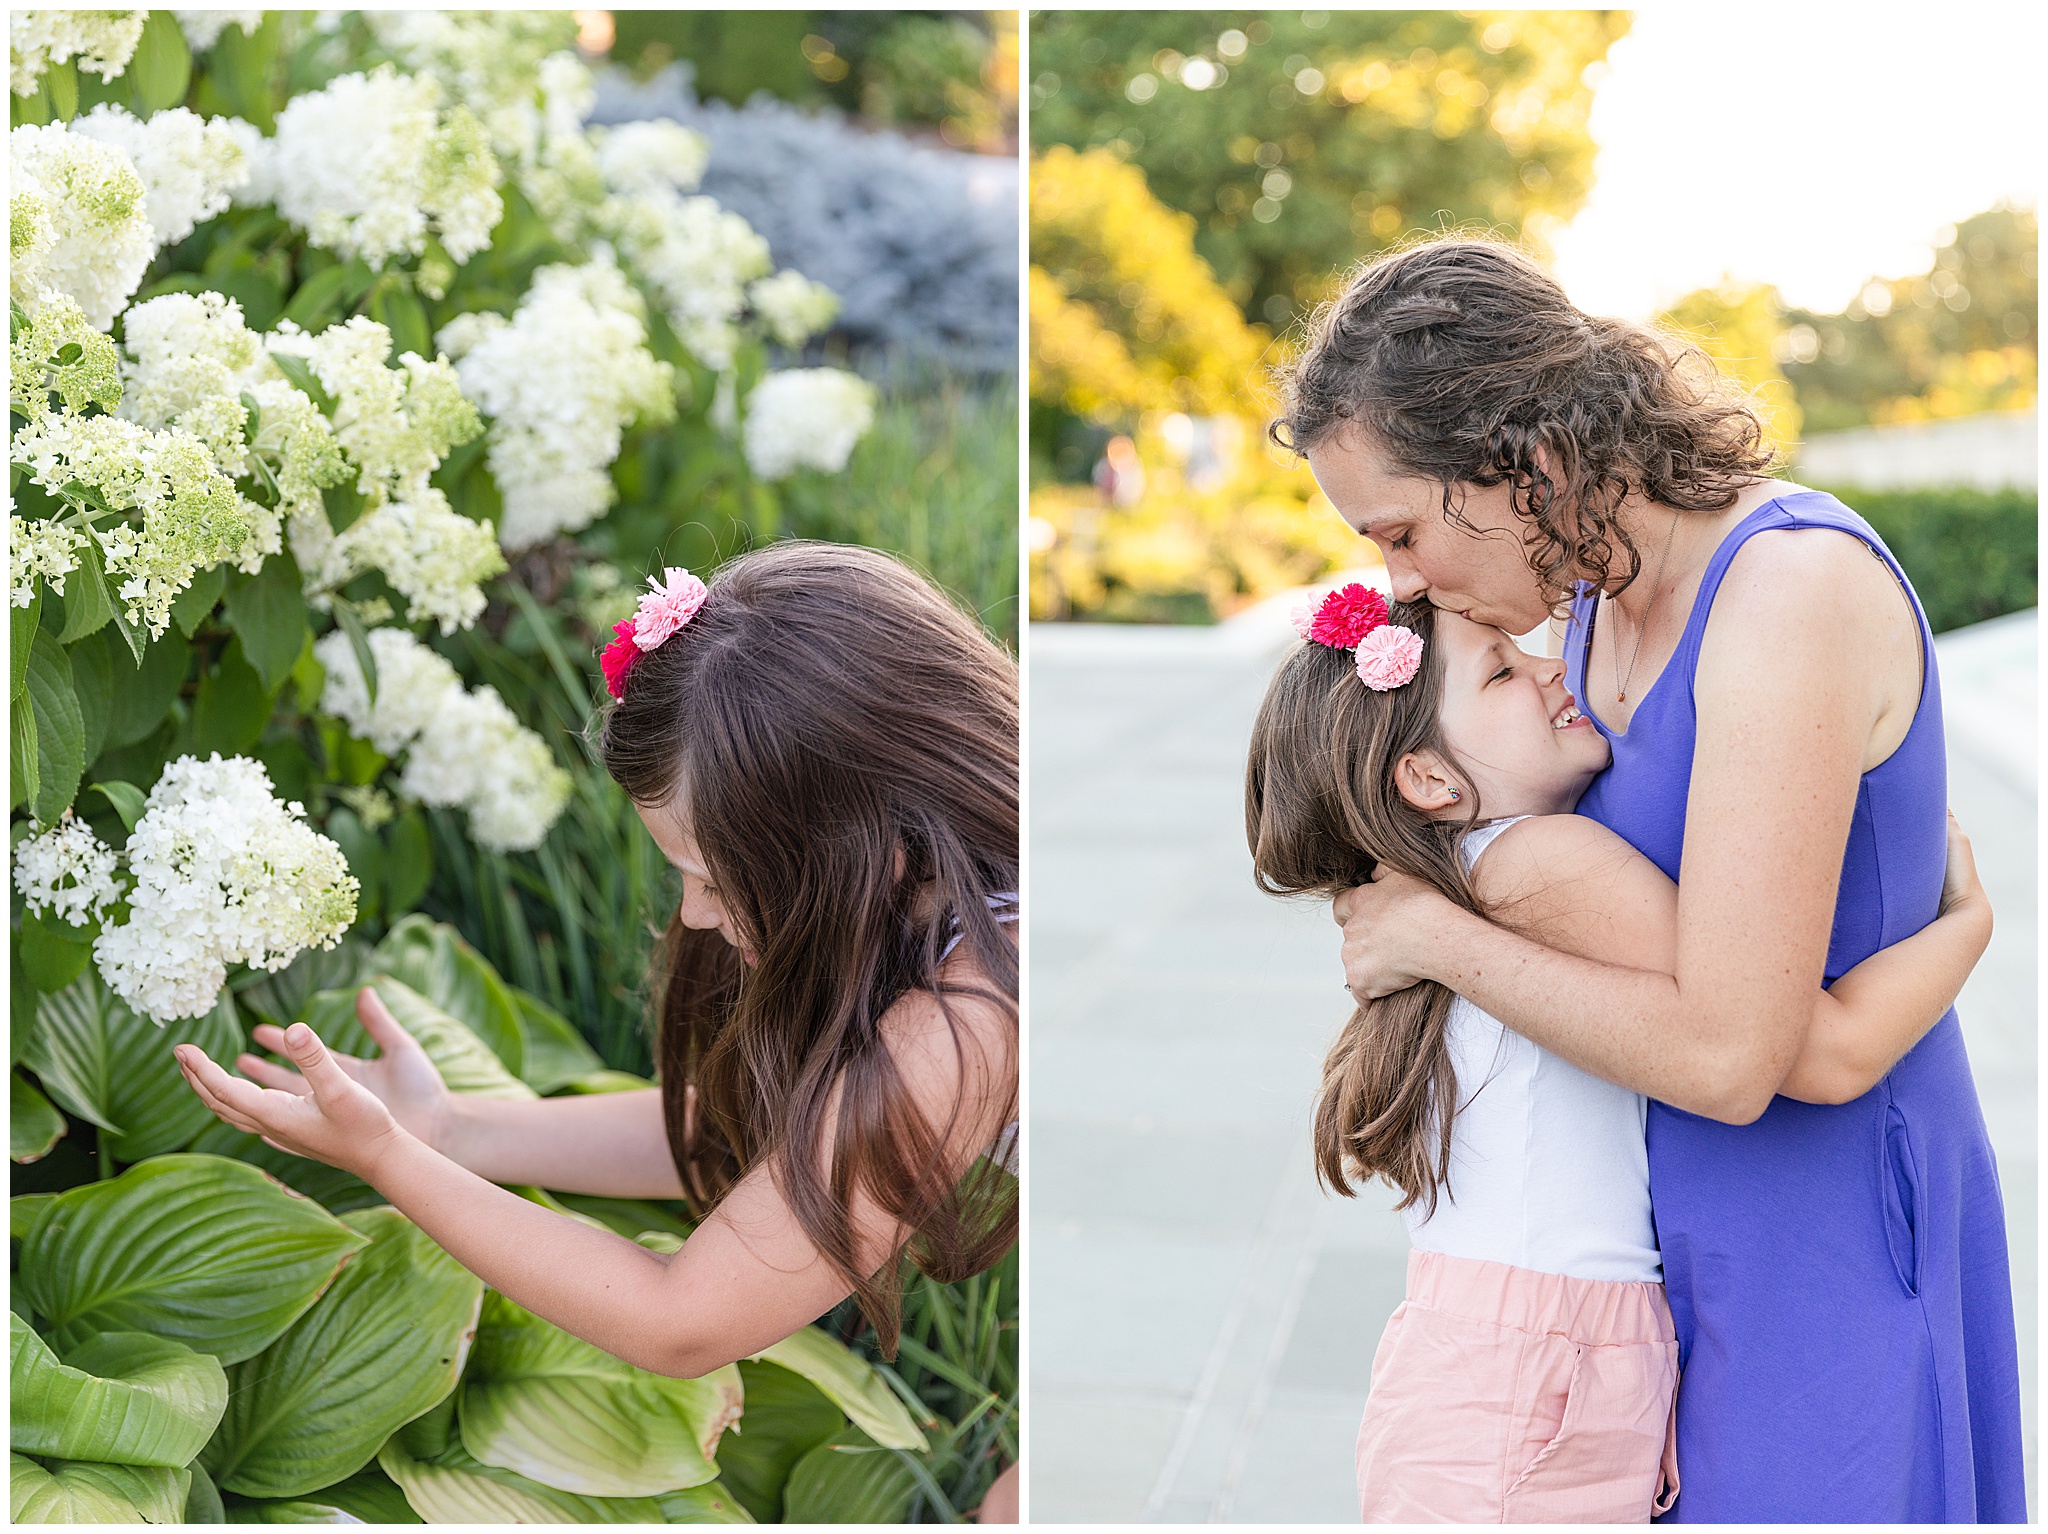 Mom and daughter by family photographer Bethany Kofmehl